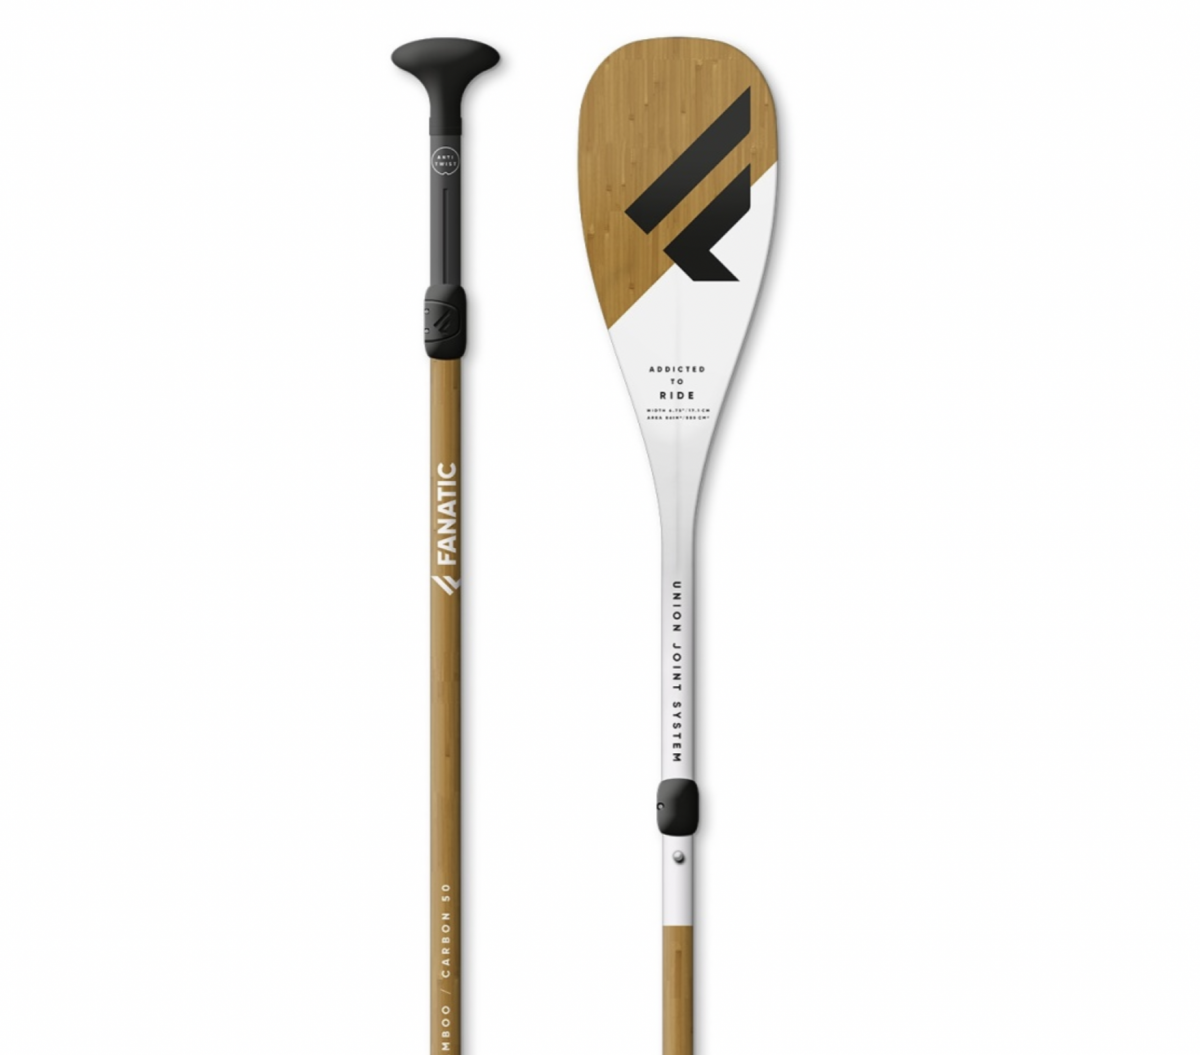 Fanatic Bamboo Carbon 50% 3pc paddle